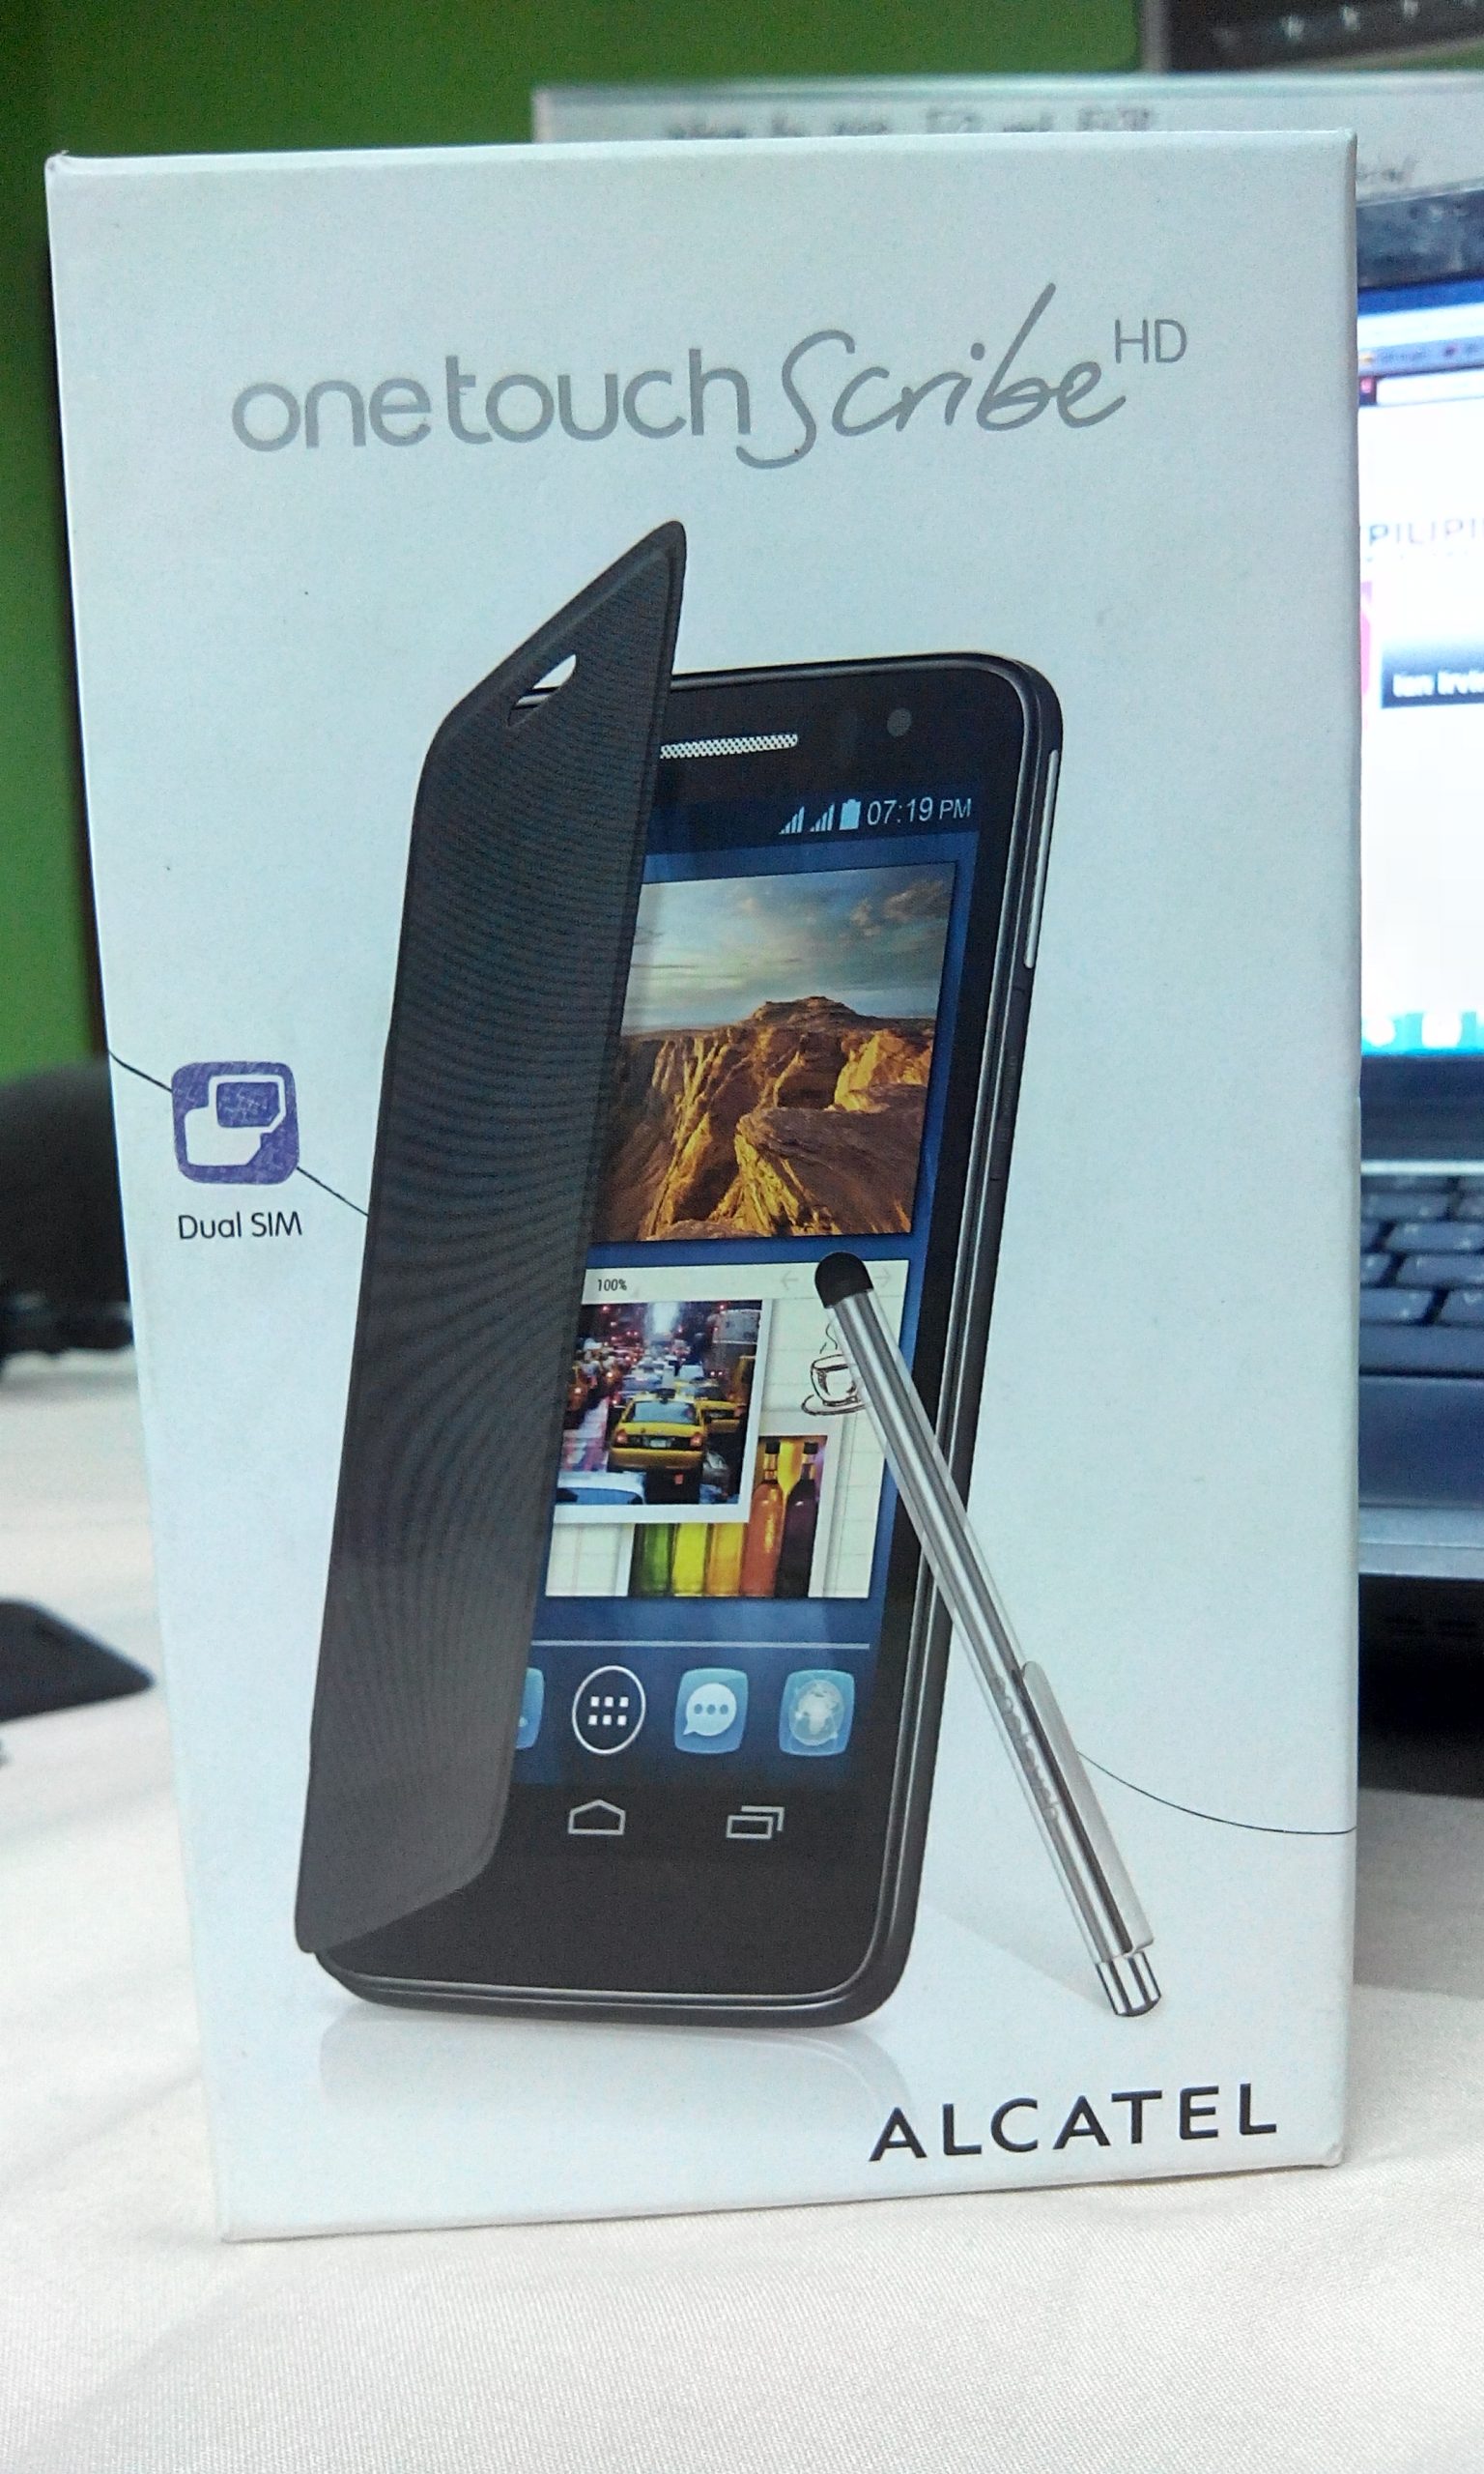 Alcatel One Touch Scribe HD Review